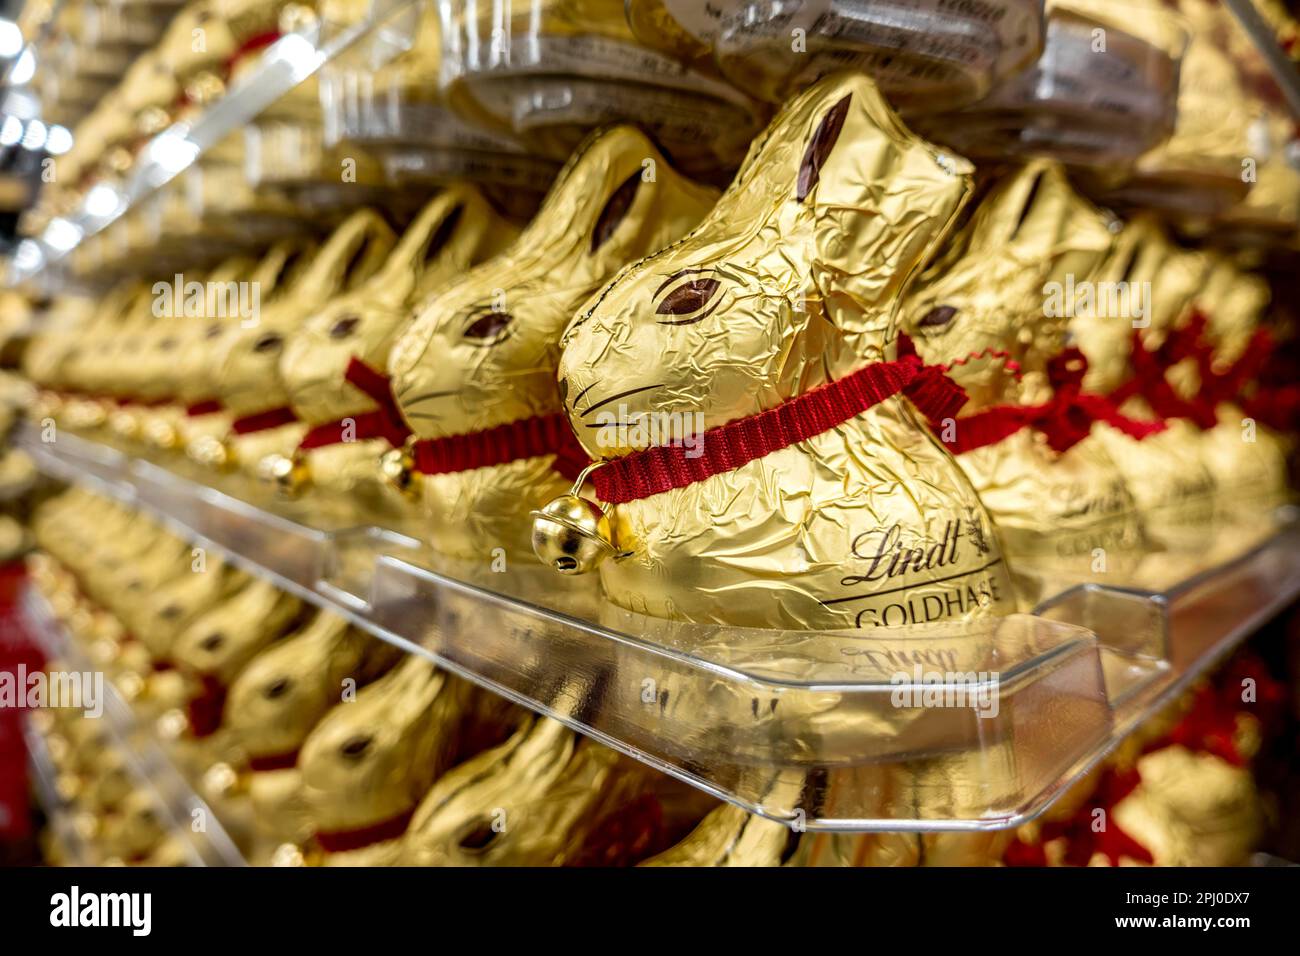 Many chocolate Easter bunnies, chocolate bunnies, Lindt gold bunnies, pallet in supermarket, shopping centre, Germany Stock Photo